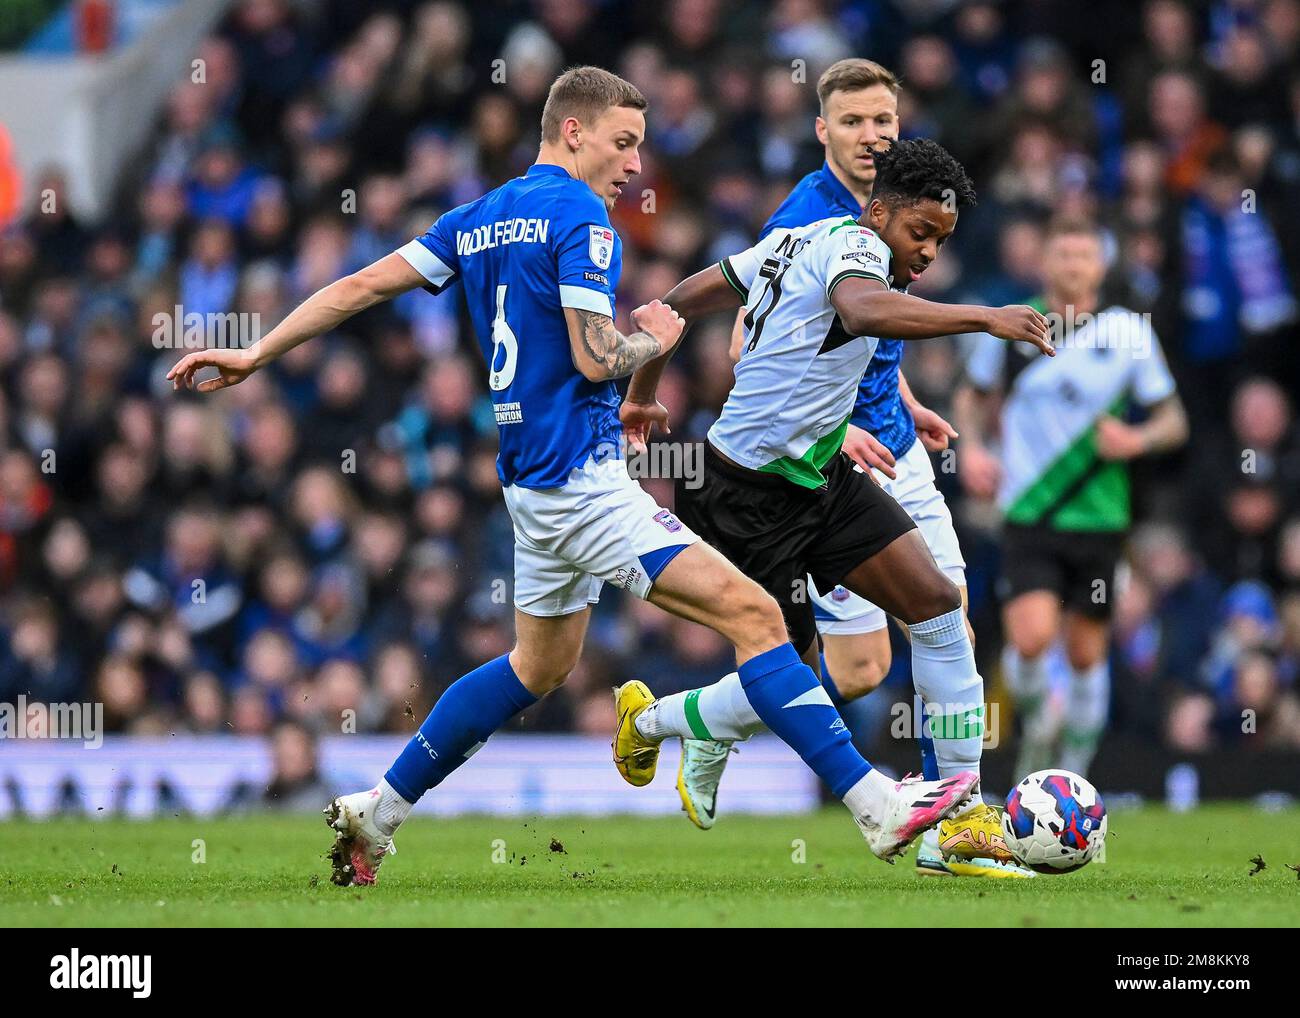 Plymouth Argyle forward Niall Ennis  (11) goes past Ipswich Town defender Luke Woolfenden  (6)  during the Sky Bet League 1 match Ipswich Town vs Plymouth Argyle at Portman Road, Ipswich, United Kingdom, 14th January 2023  (Photo by Stanley Kasala/News Images) Stock Photo